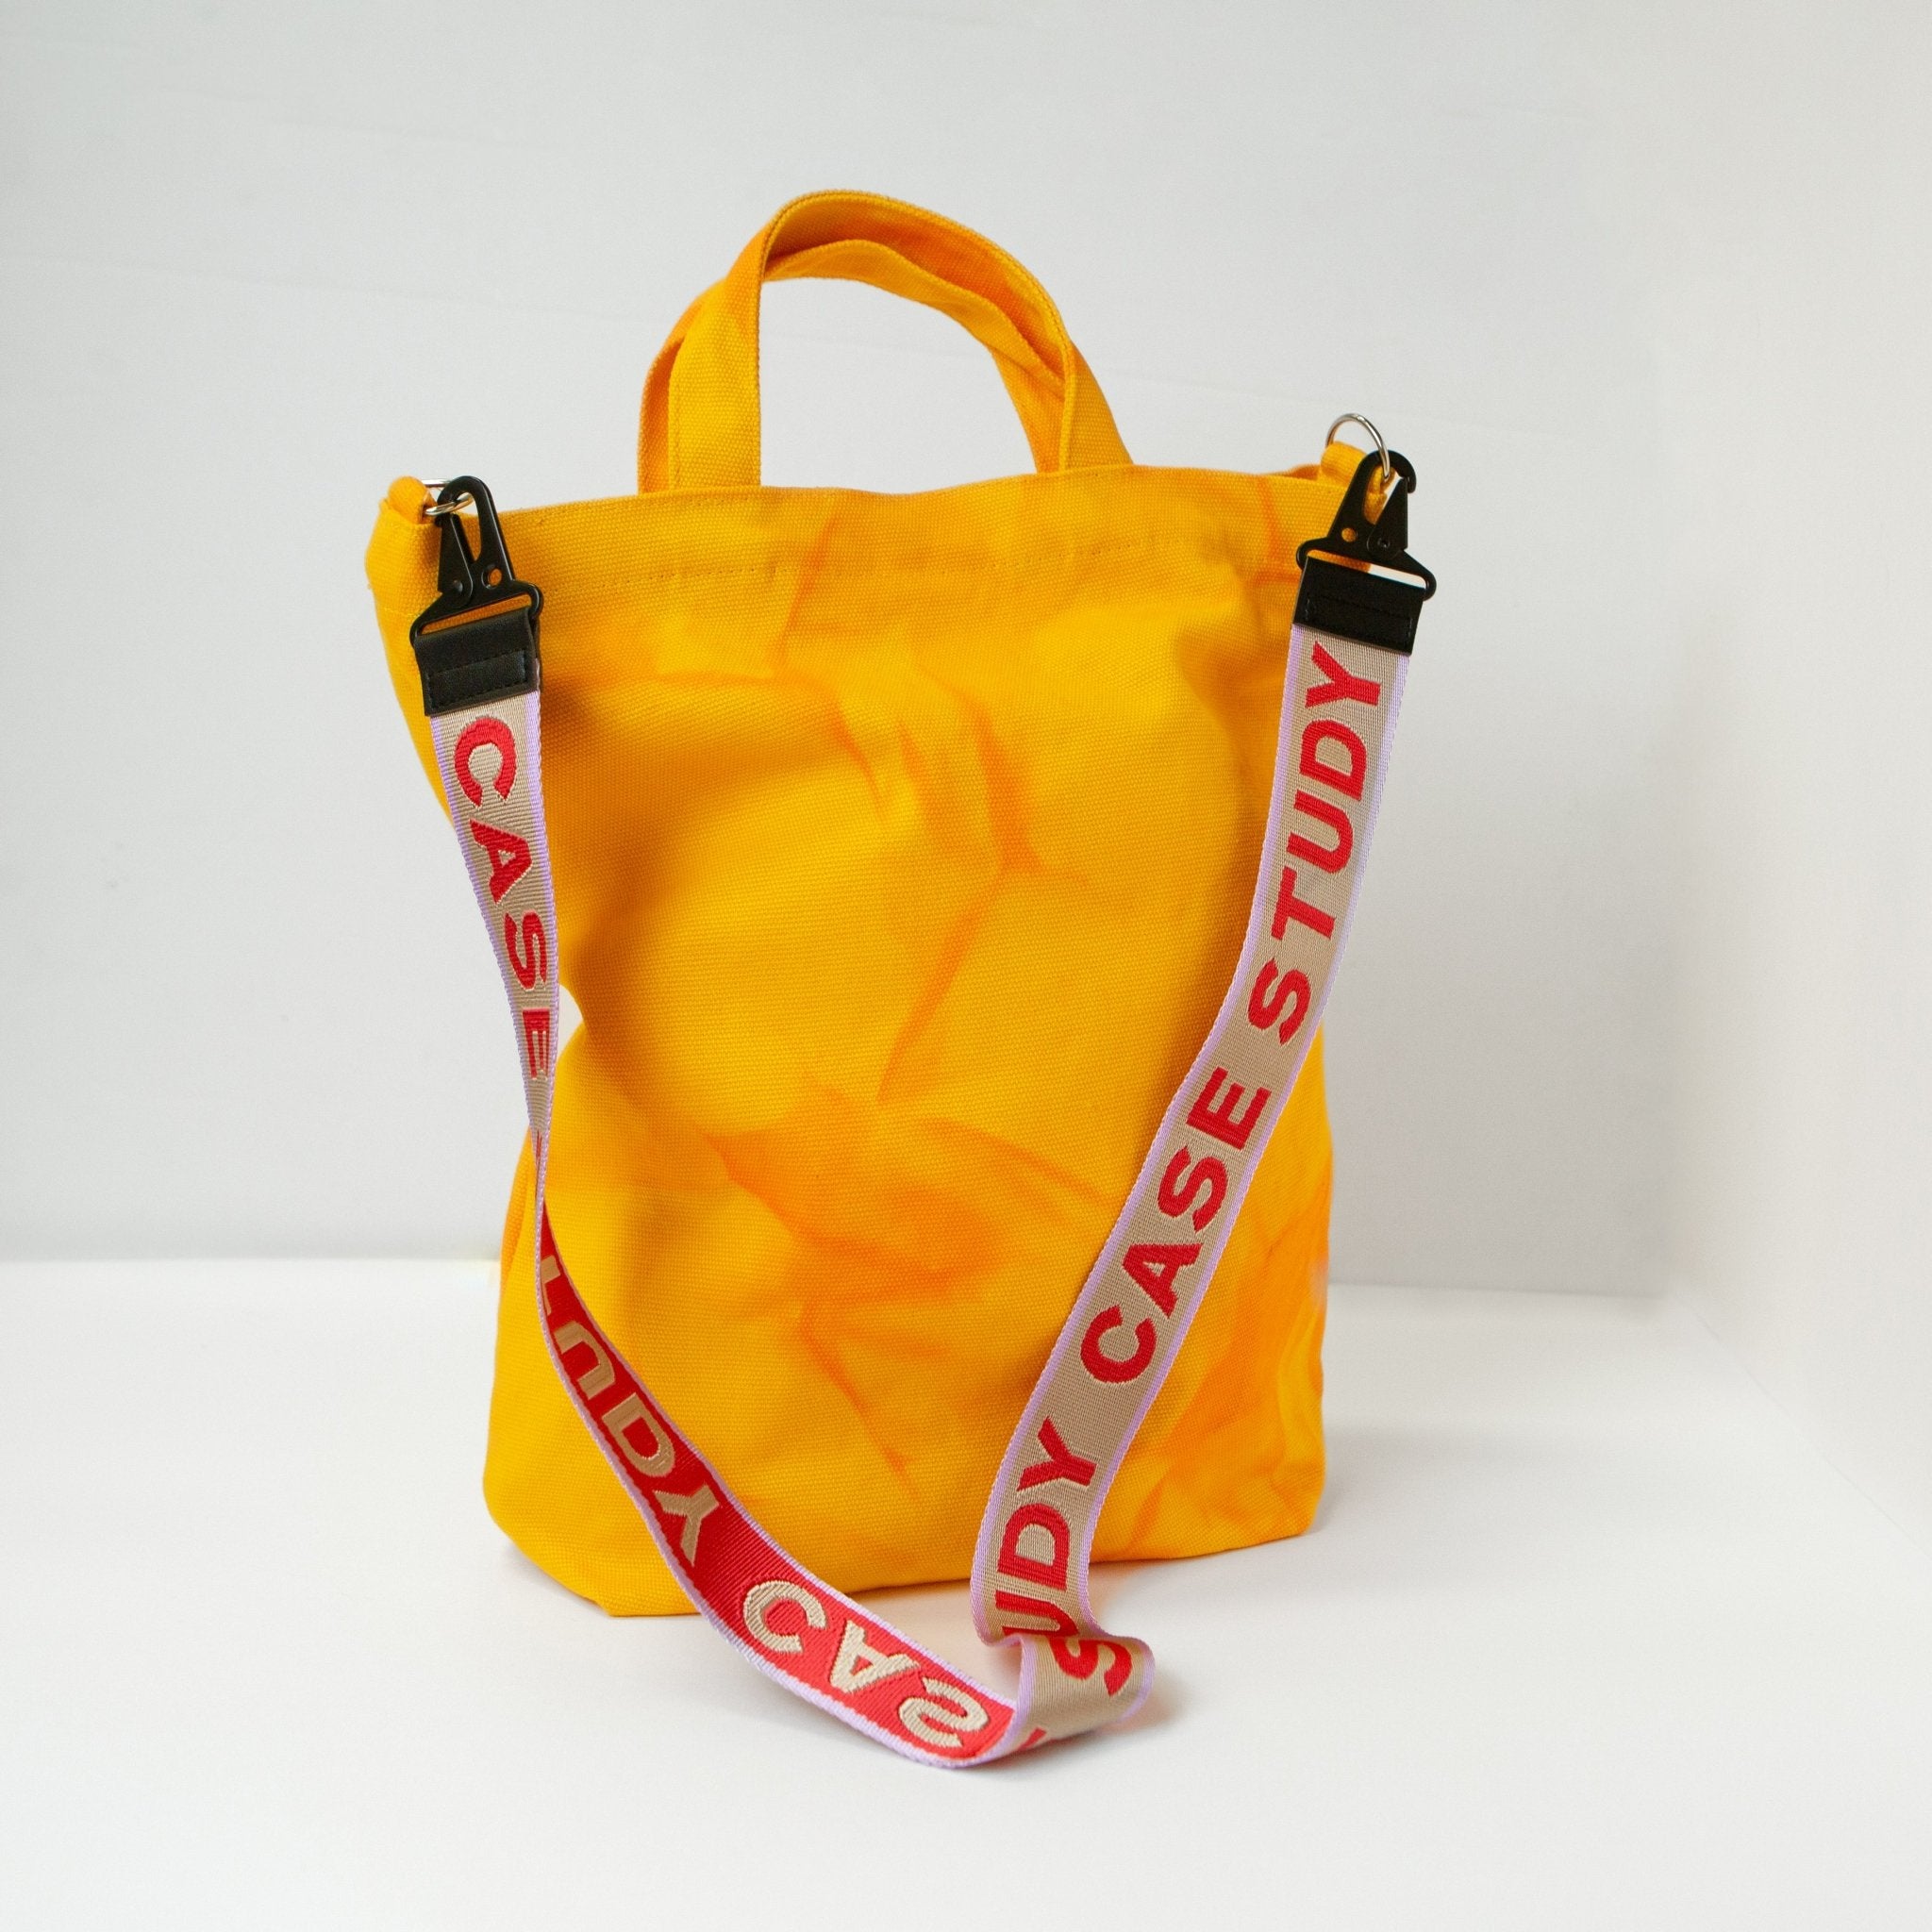 a tie dyed canvas tote in a bright yellow color with orange dye and a red and lavender  crossbody strap